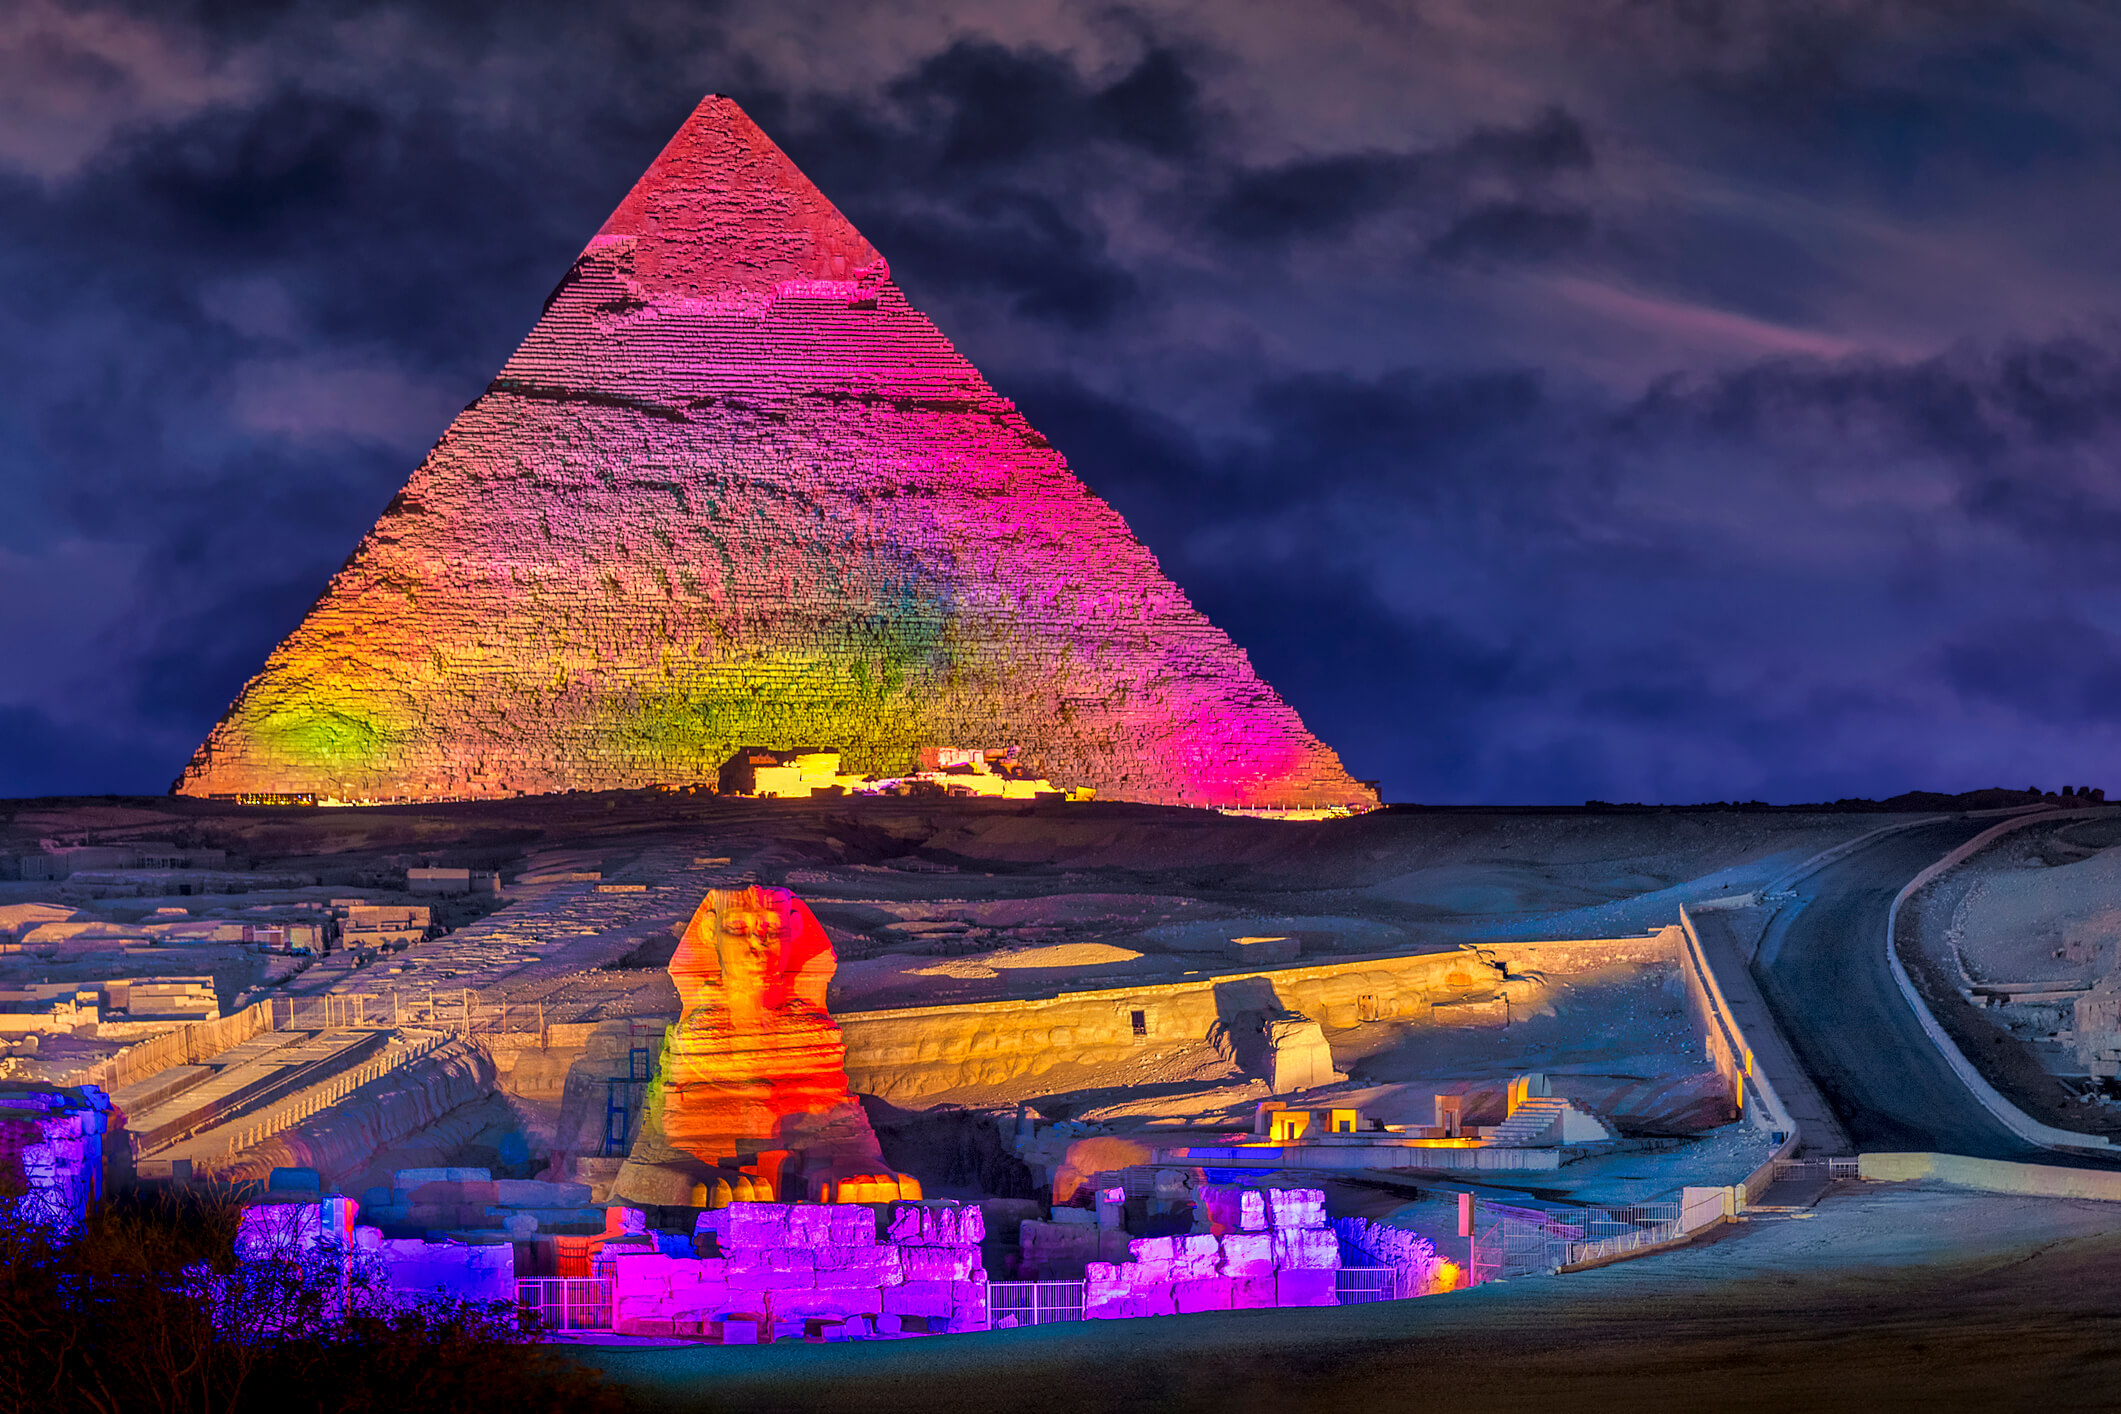 View Of The Pyramids in Egypt